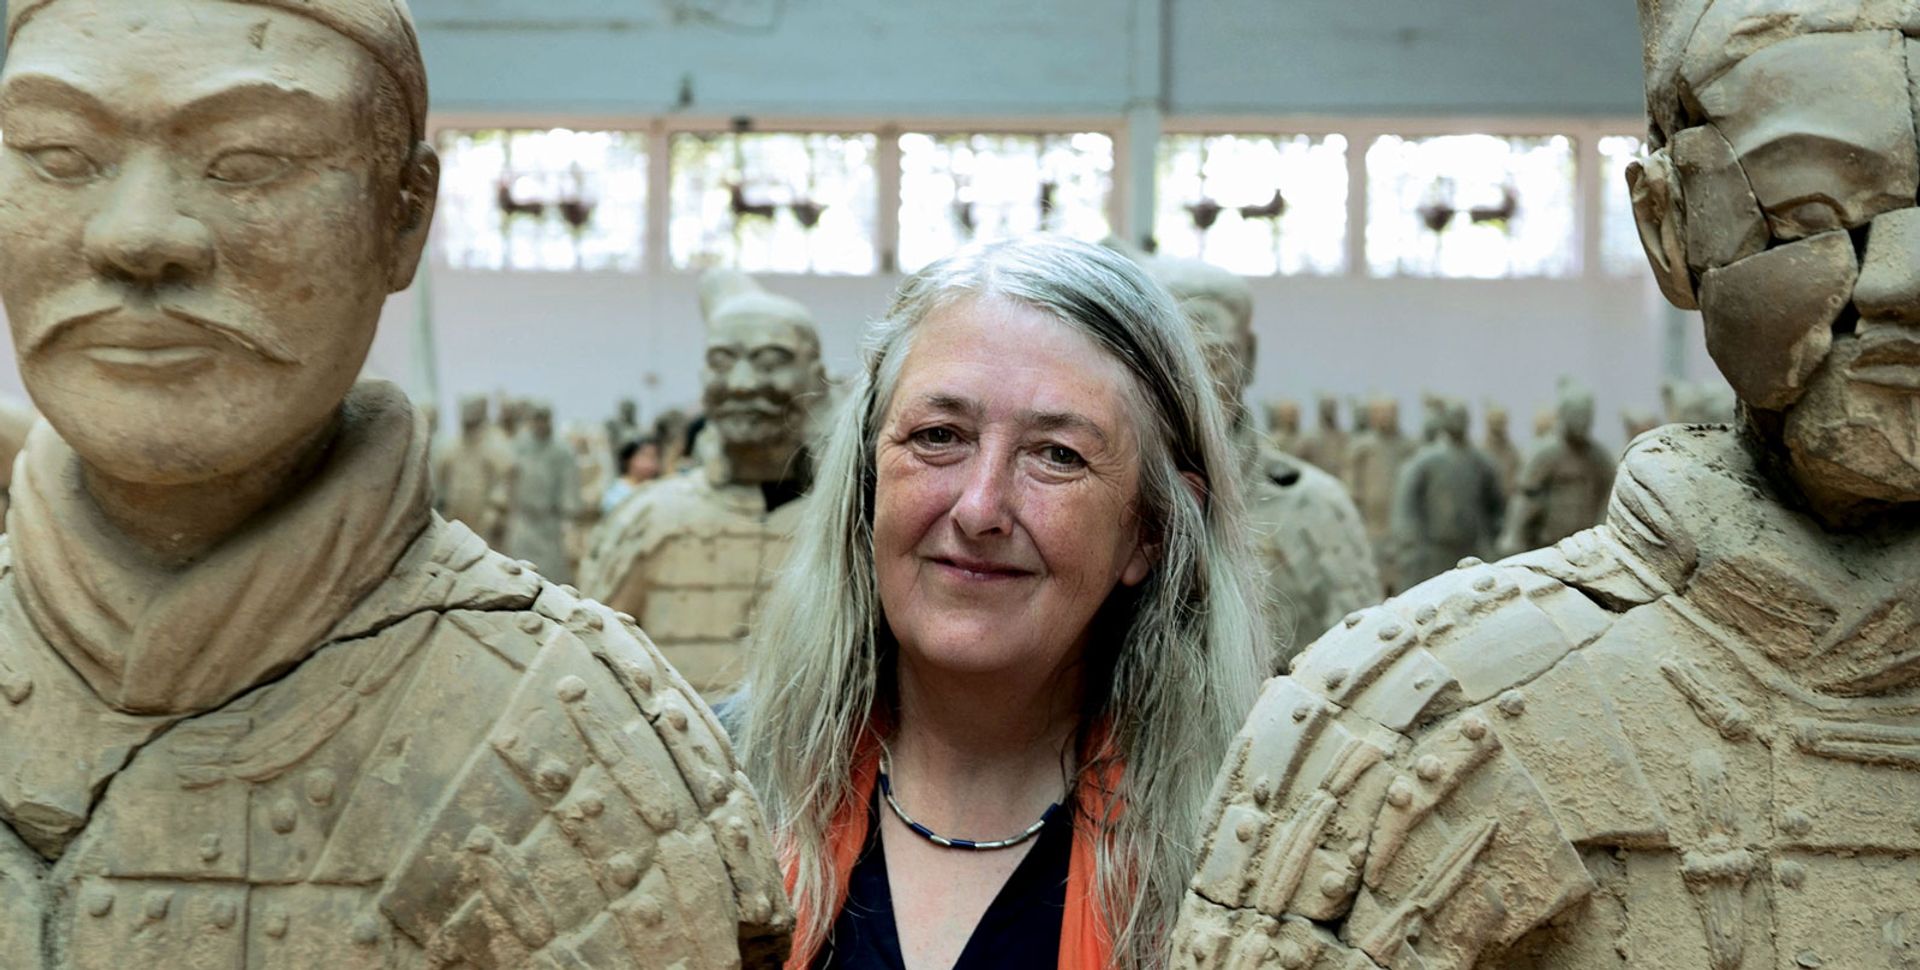 Mary Beard with terracotta army sculptures in Civilisations Nutopia